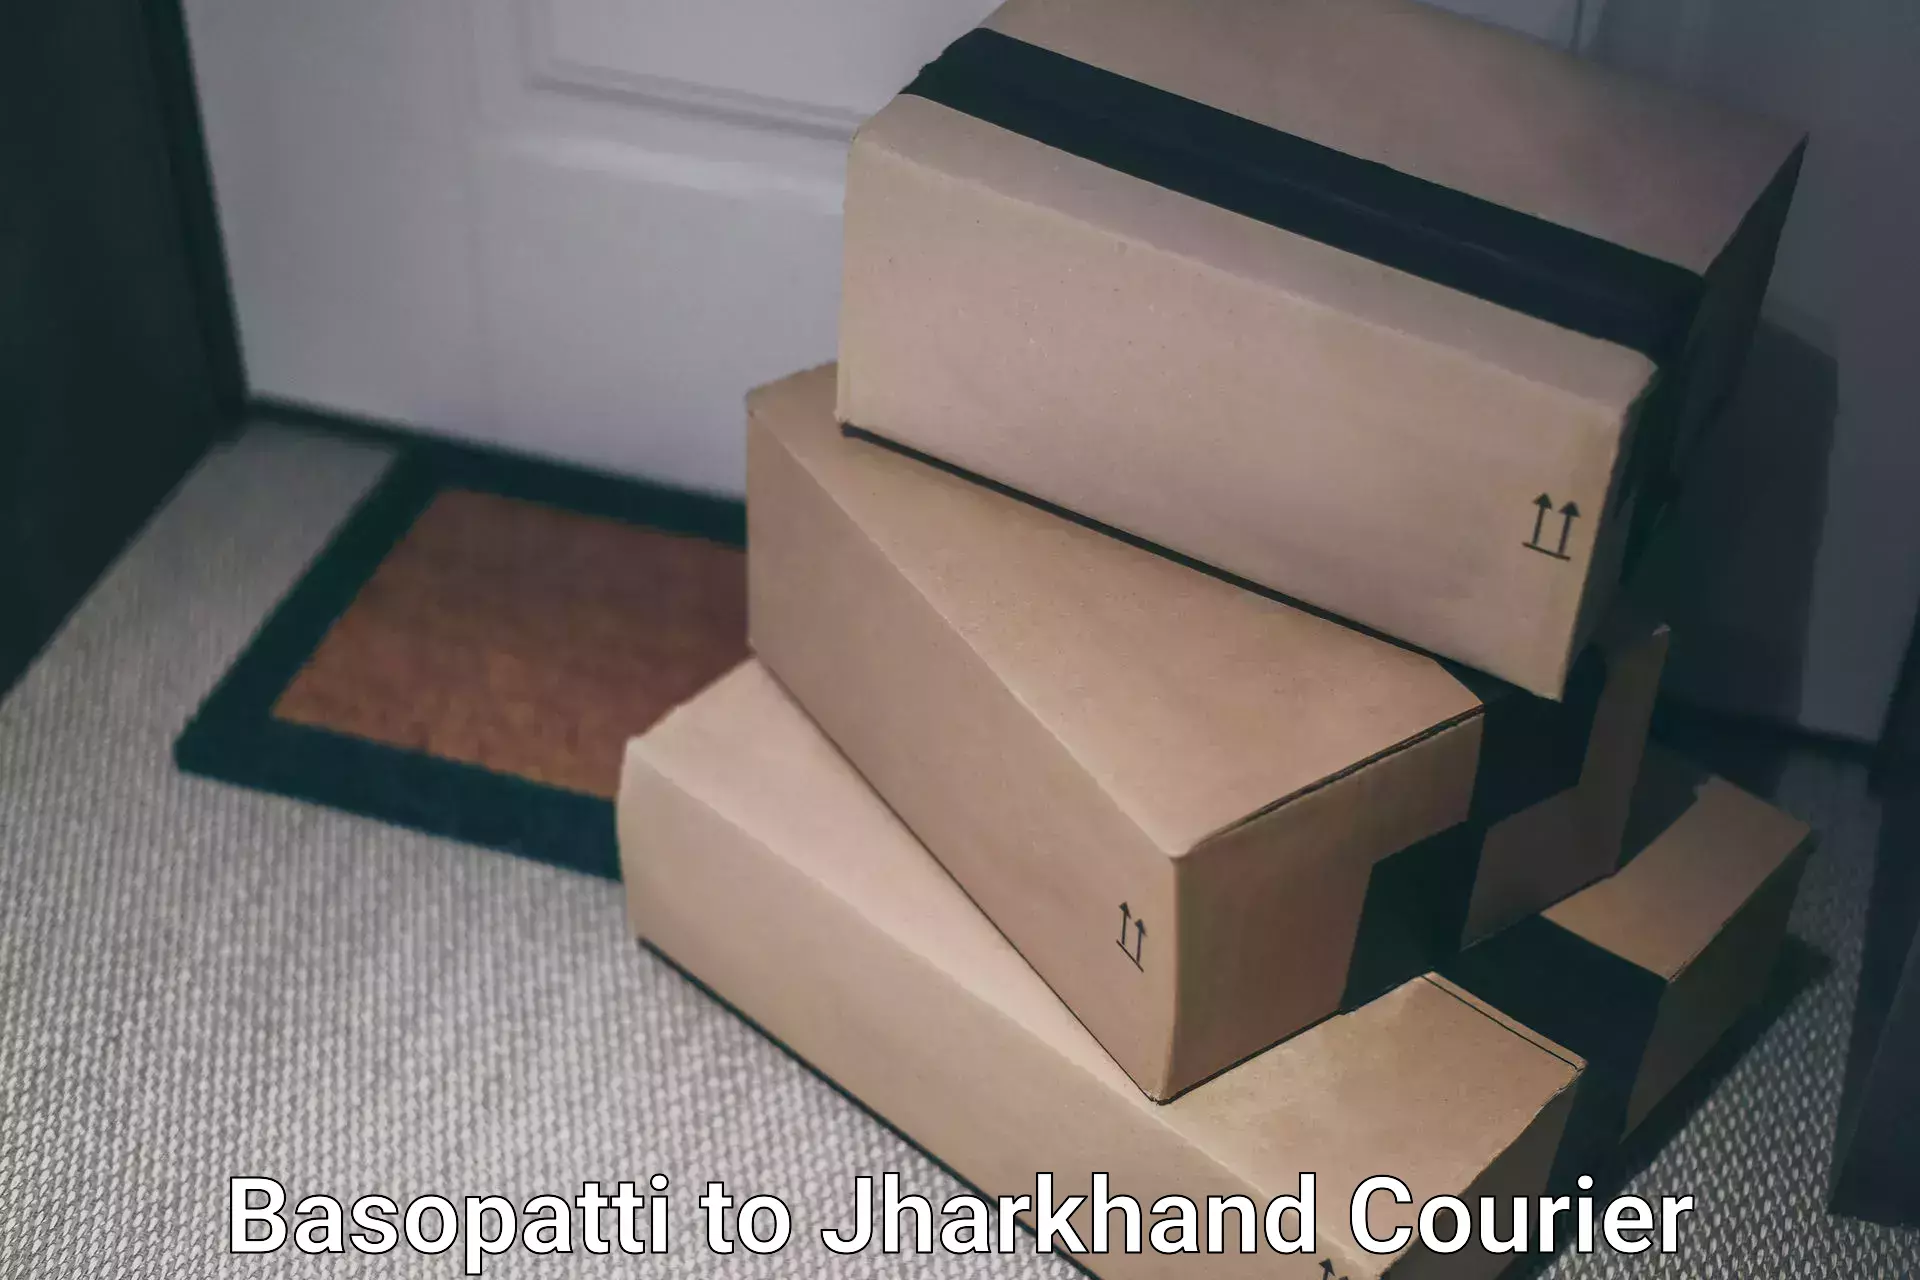 Easy access courier services Basopatti to Jharkhand